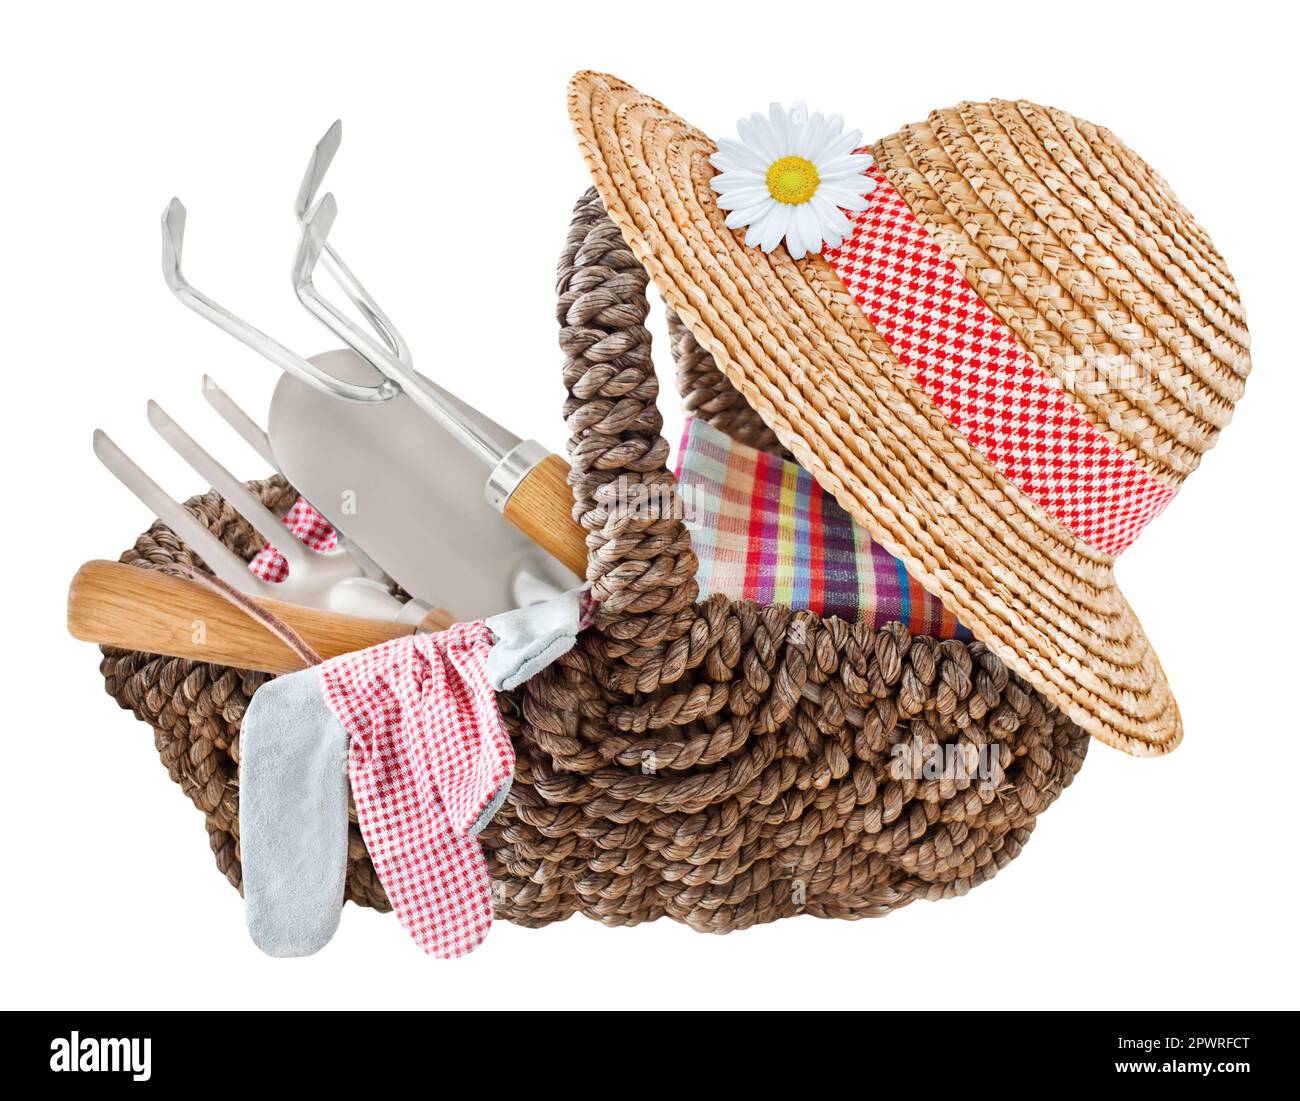 Garden tools and straw hat in a basket isolated on white background Stock Photo